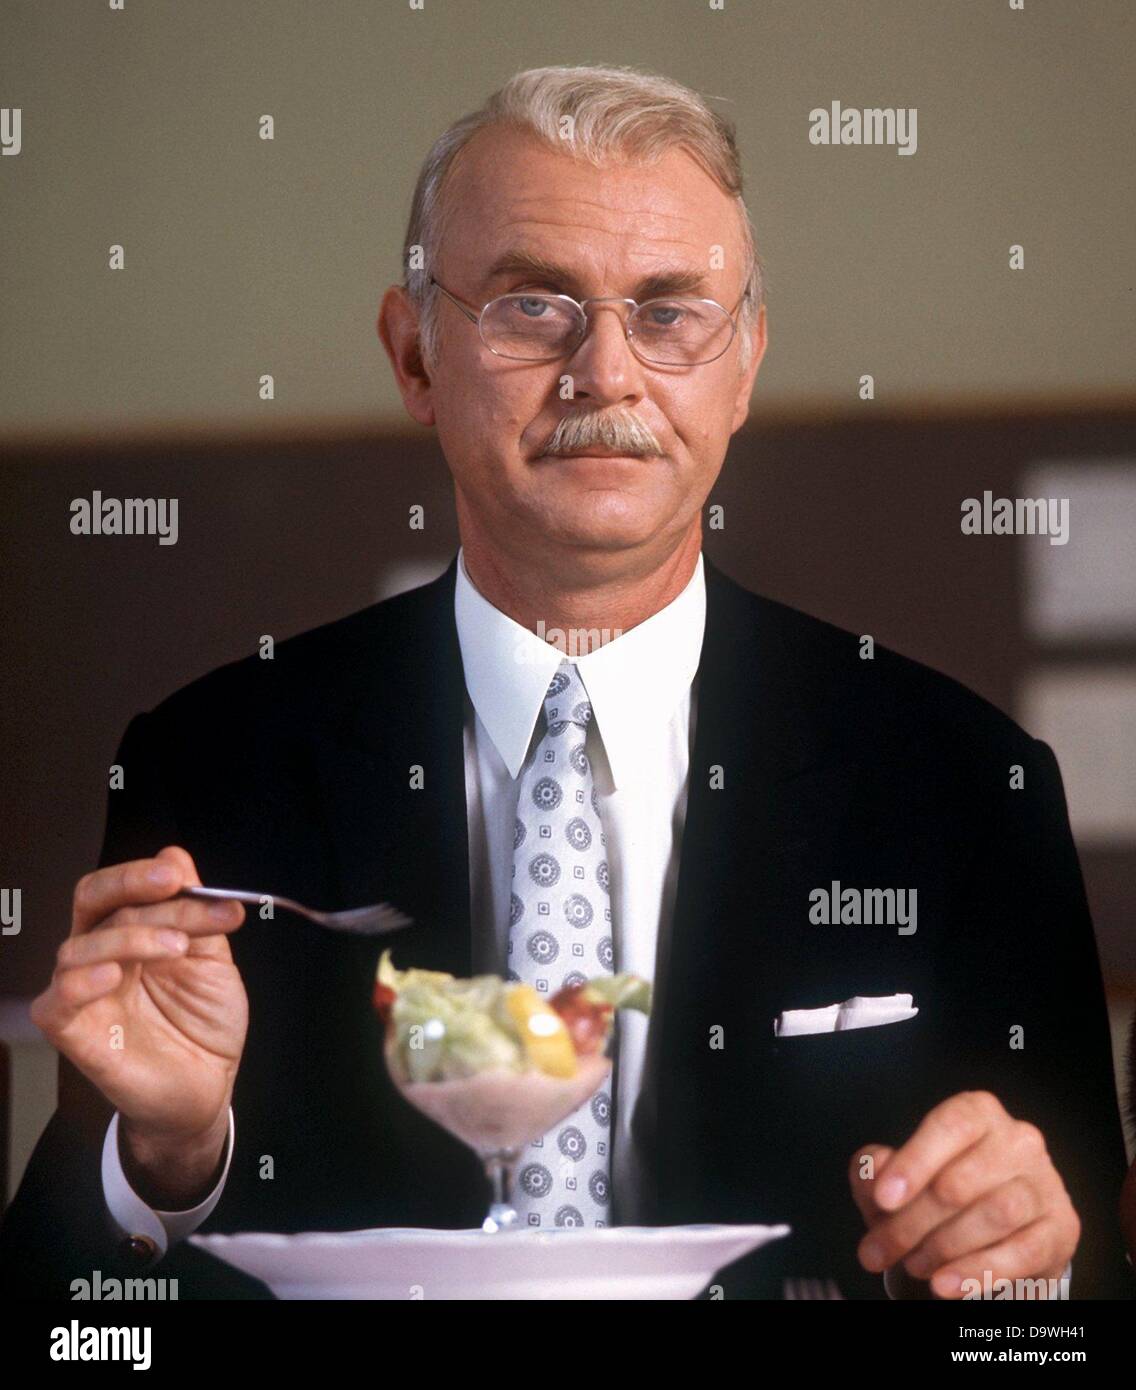 Vicco von Bülow shows how to behave at the table in a scene of the TV show 'Telecabinet' in August 1974. The writer, author and caricaturist Vicco von Bülow alias Loriot already became popular in the 1950s. He celebrates his 80th birthday on the 12th of November in 2003. Stock Photo